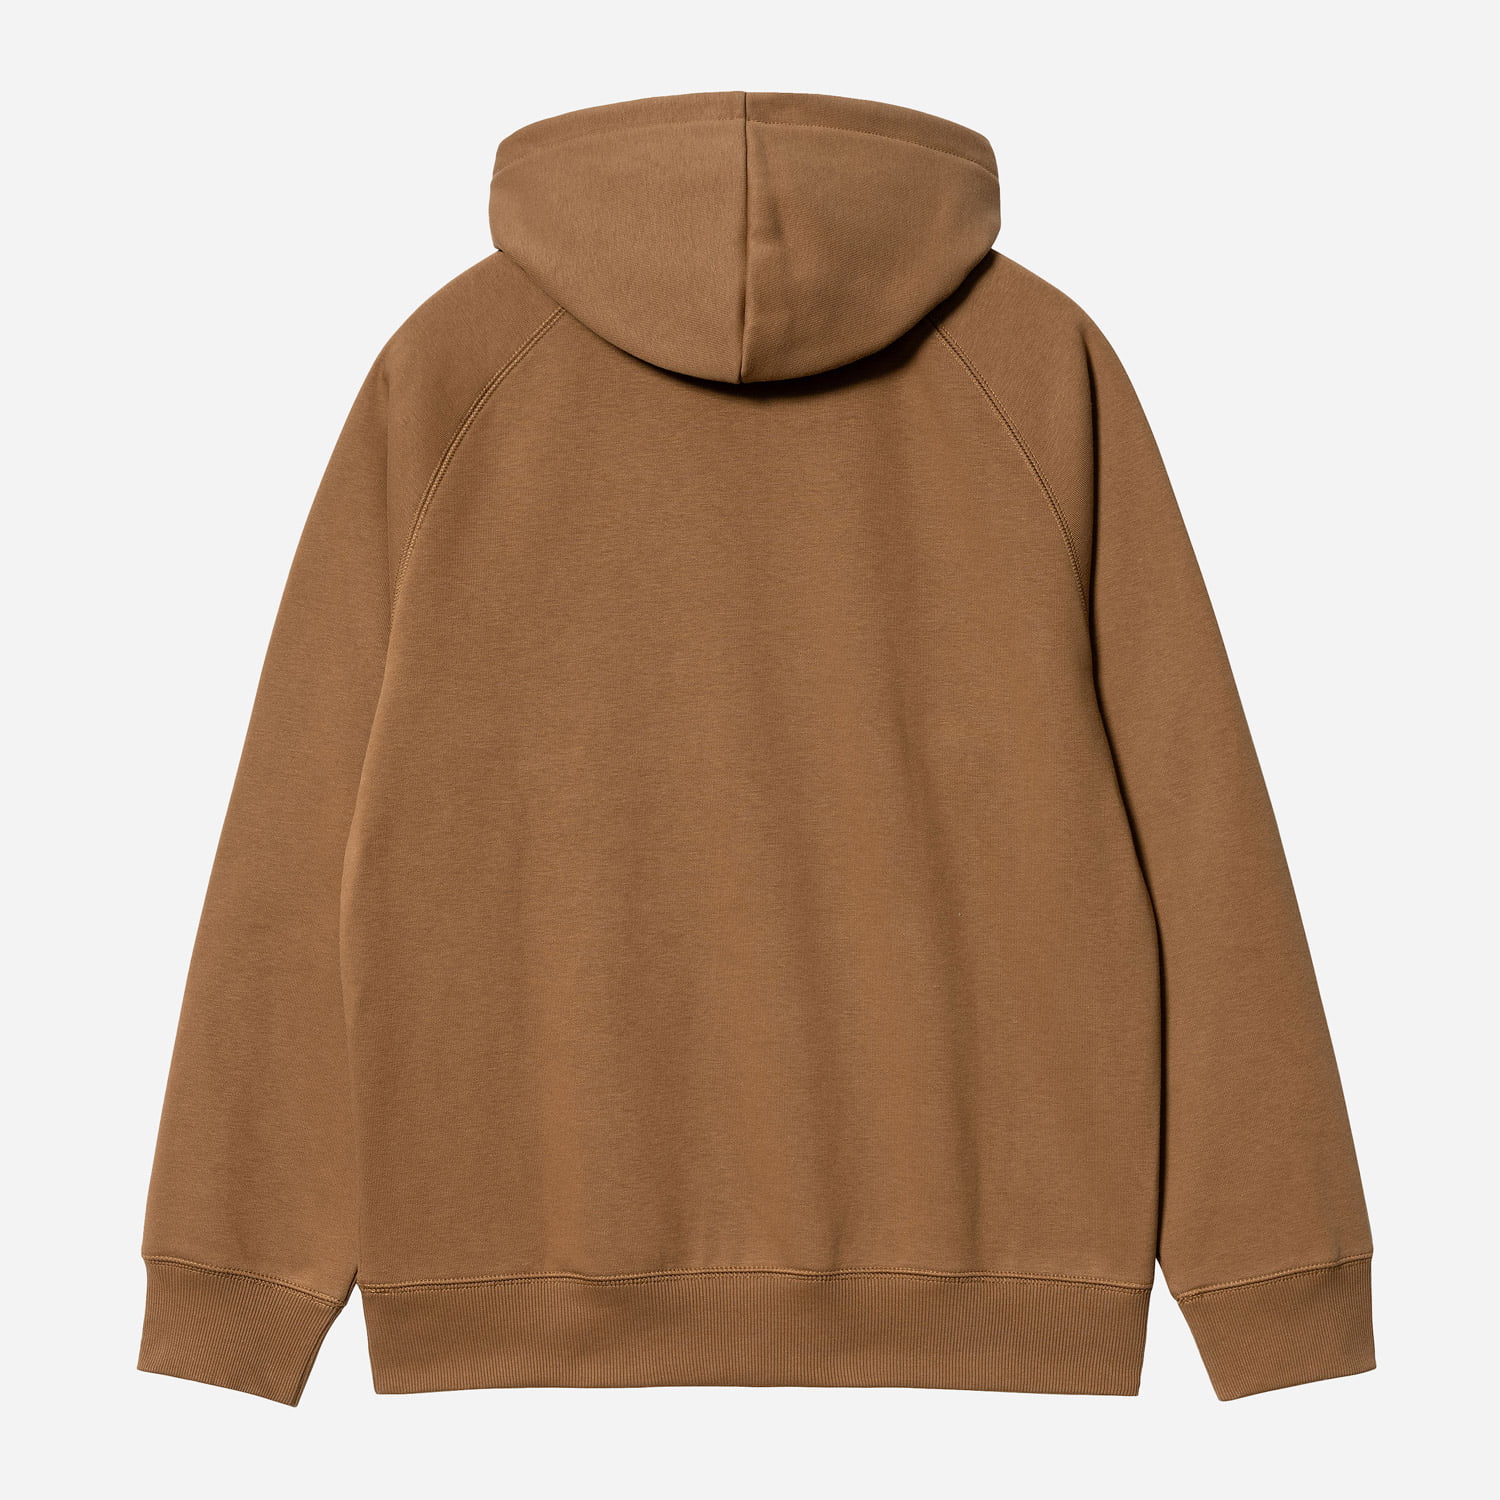 Carhartt WIP Hooded Chase Sweat - Hamilton Brown/Gold